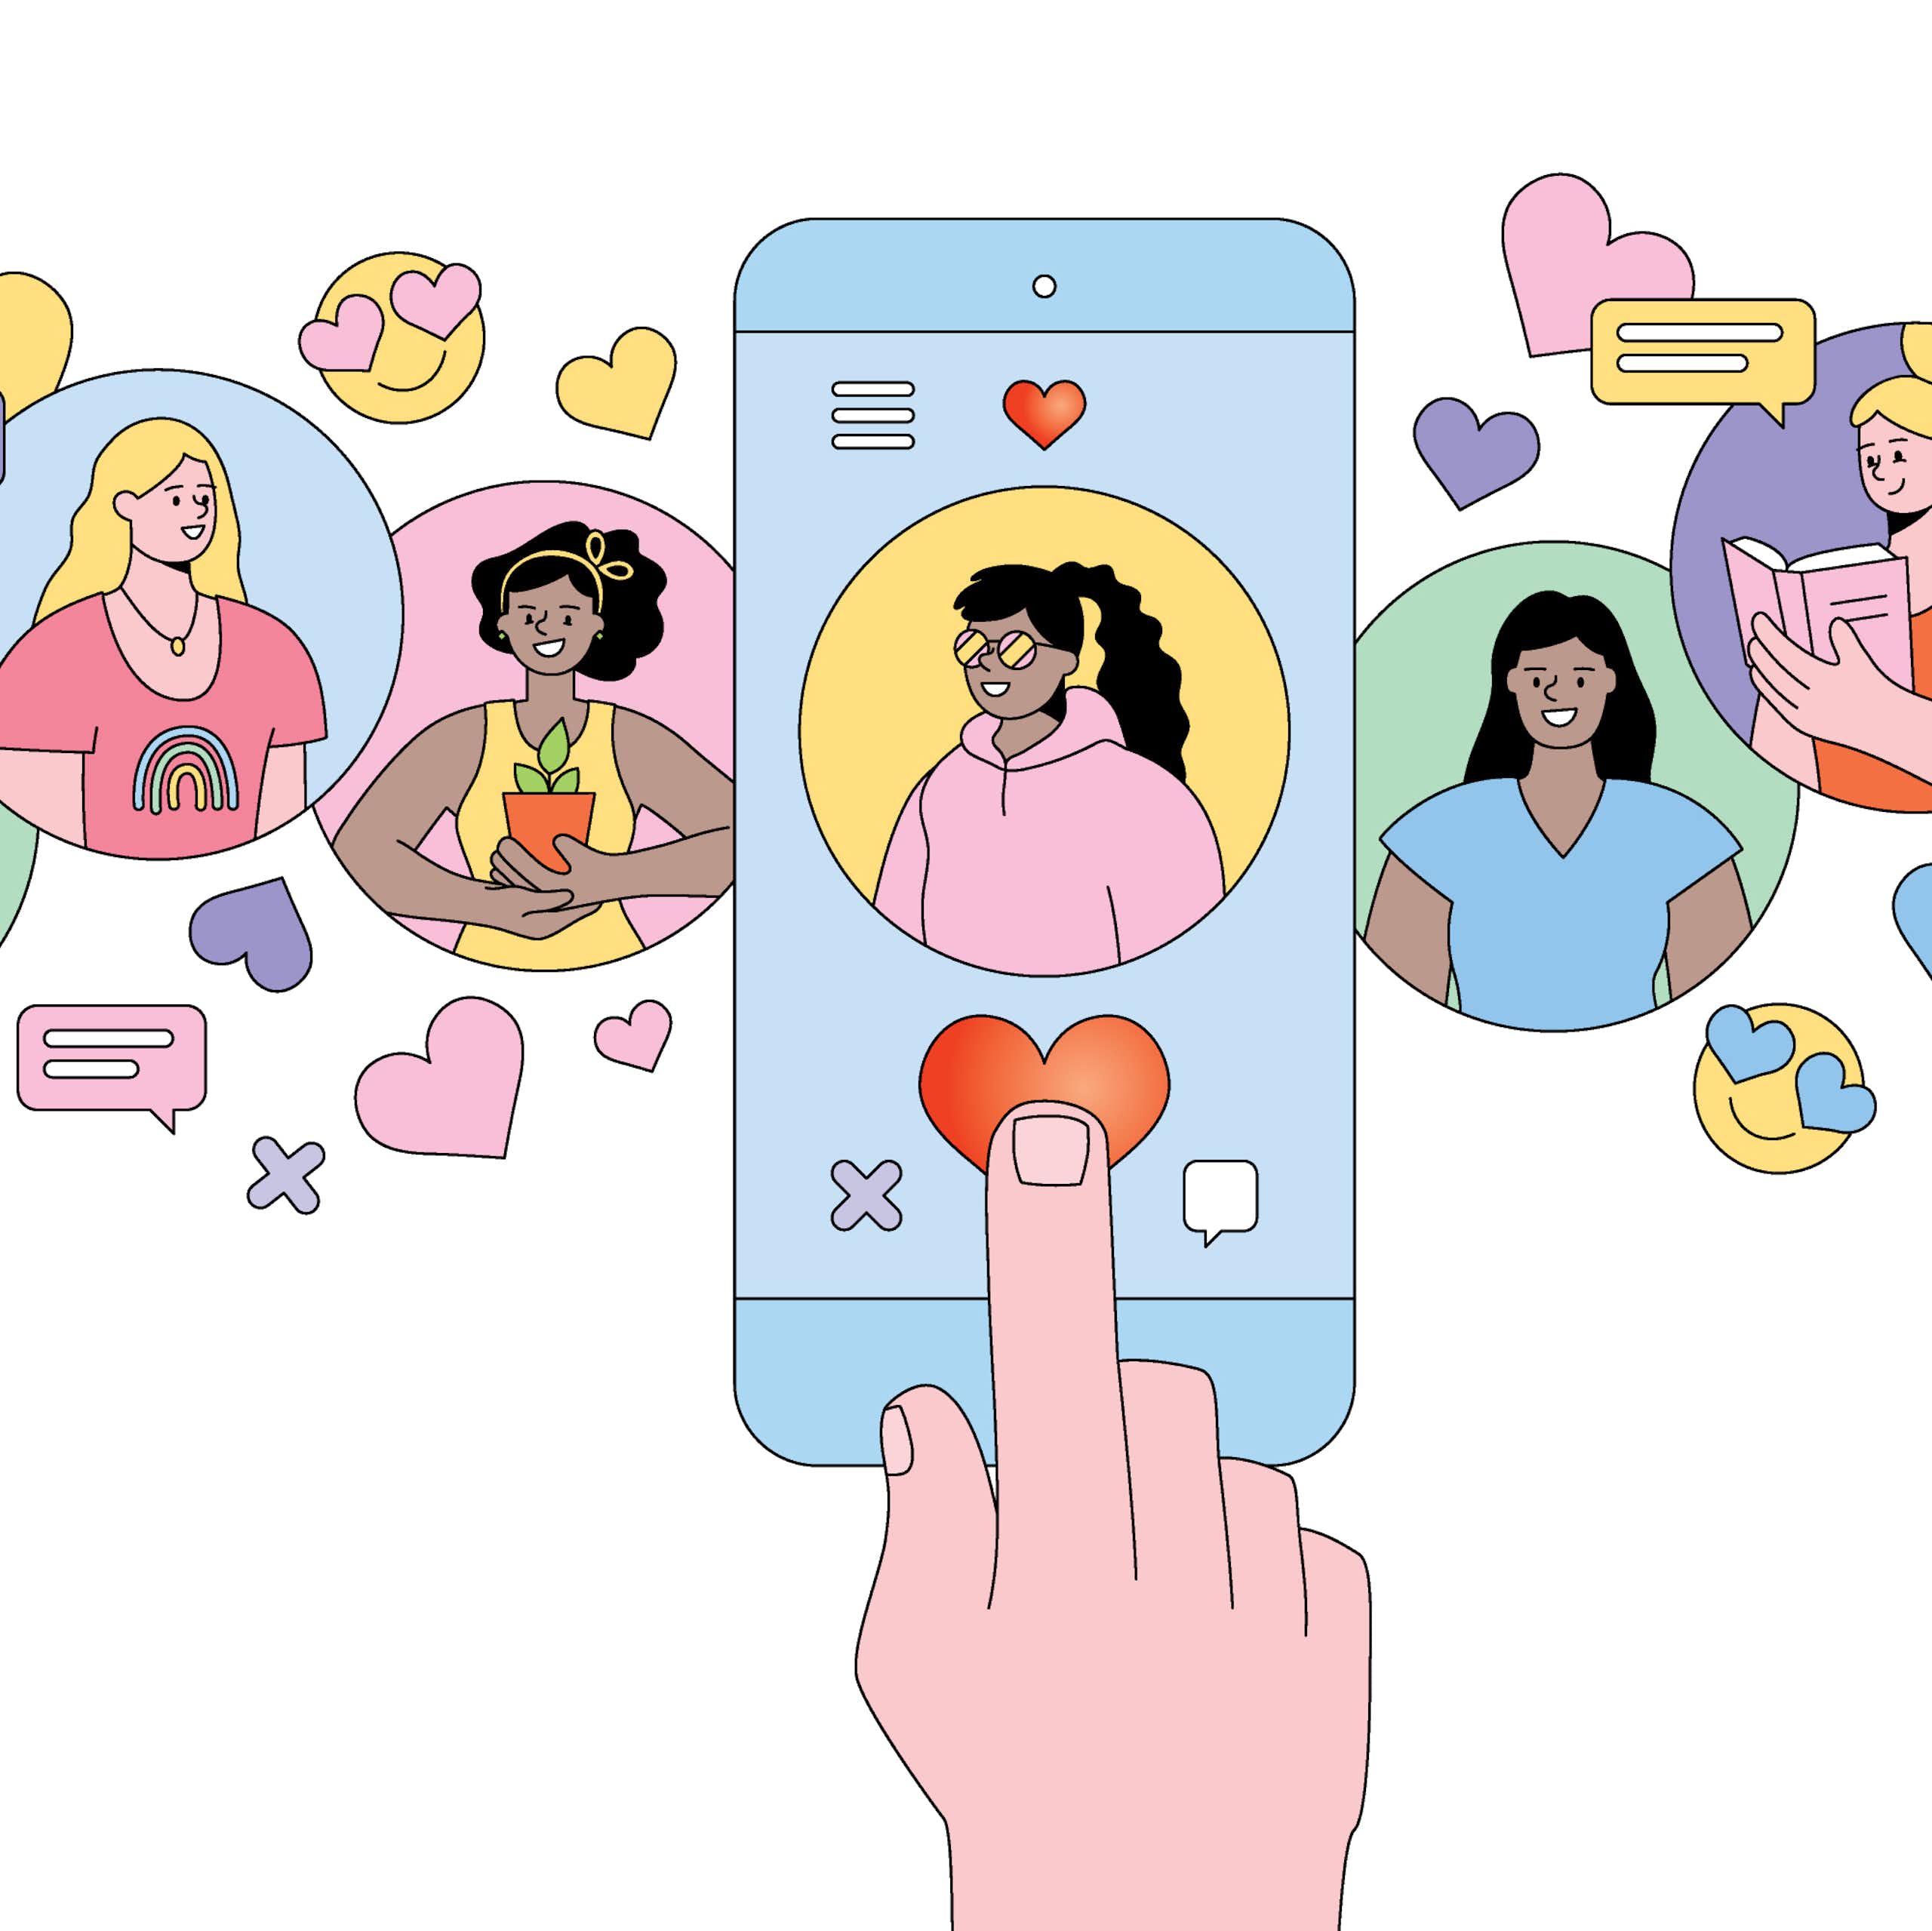 A cartoon with pastel colors shows a hand touching a heart on a phone with an image of a girl with brown skin. There are other circles and hearts also showing cartoon images of women with different colored hair and skin.